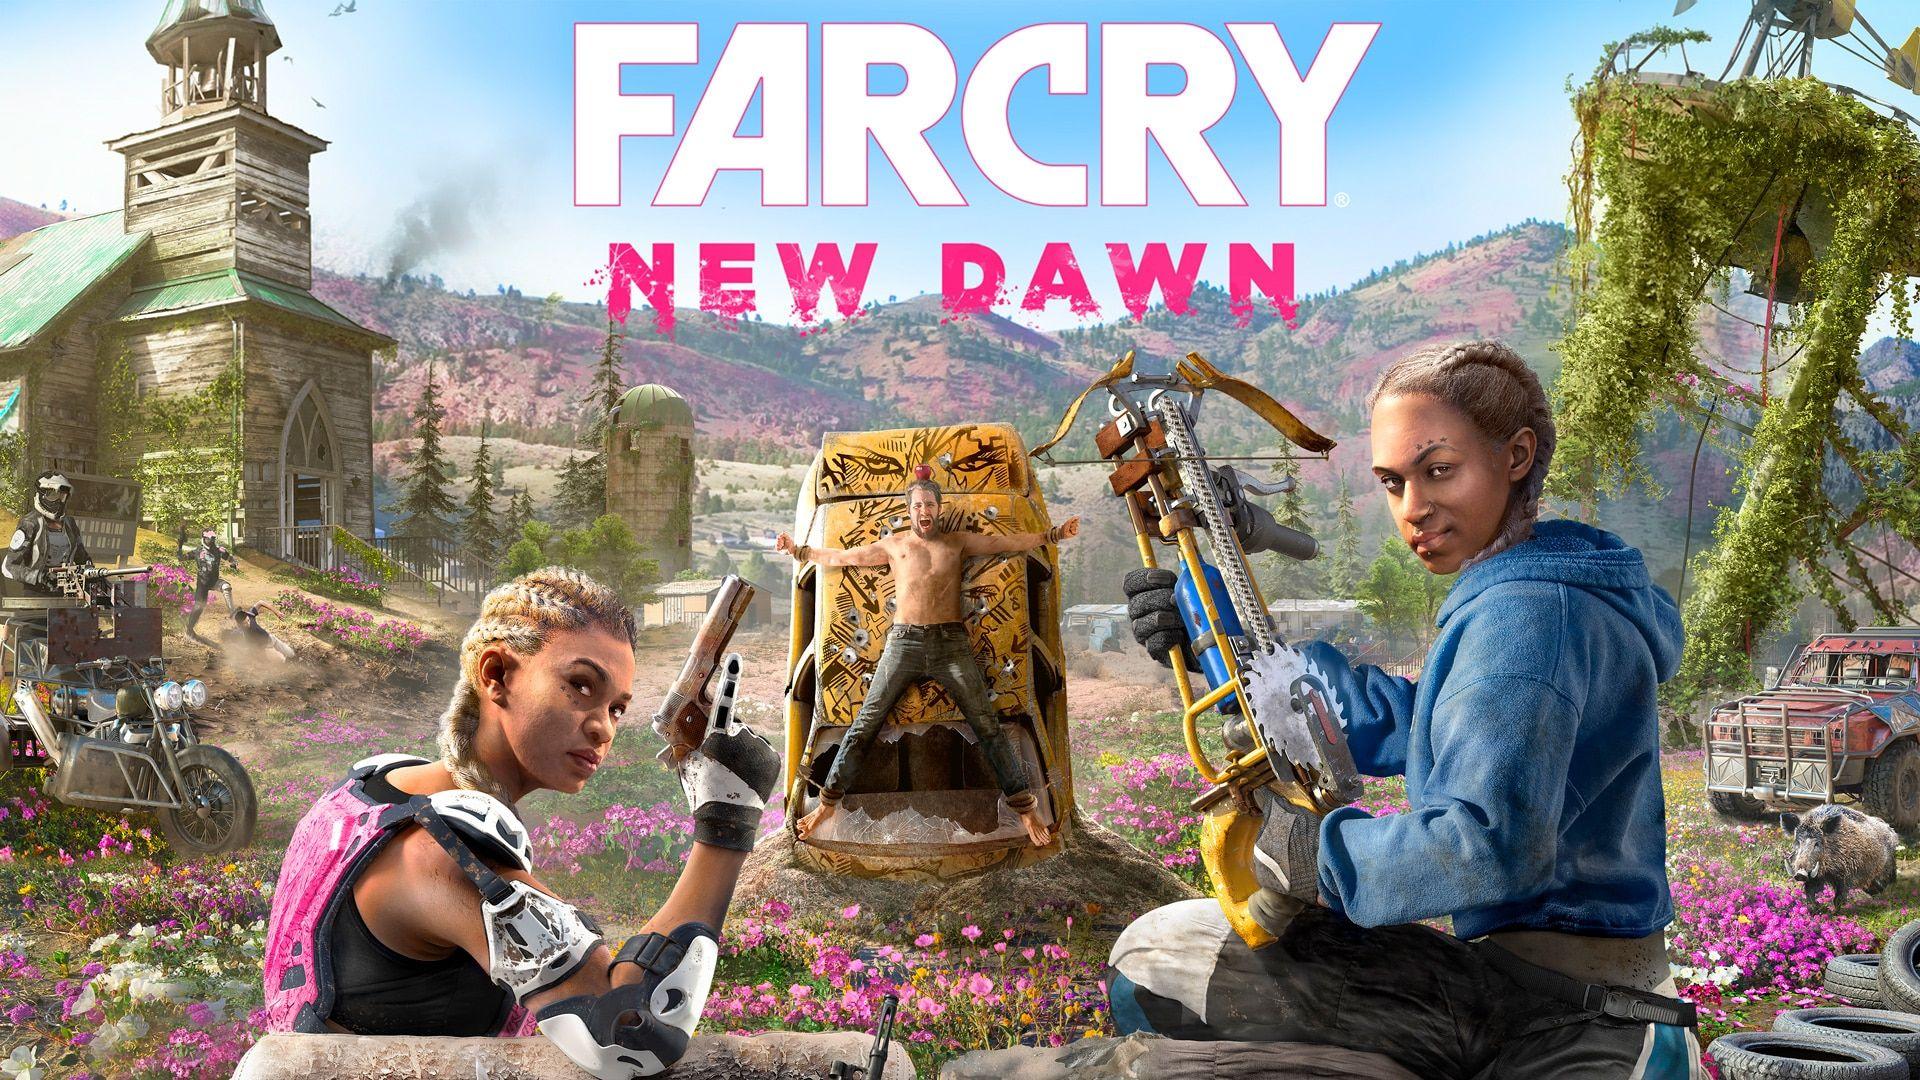 Far Cry New Dawn on PS4, Xbox One, PC